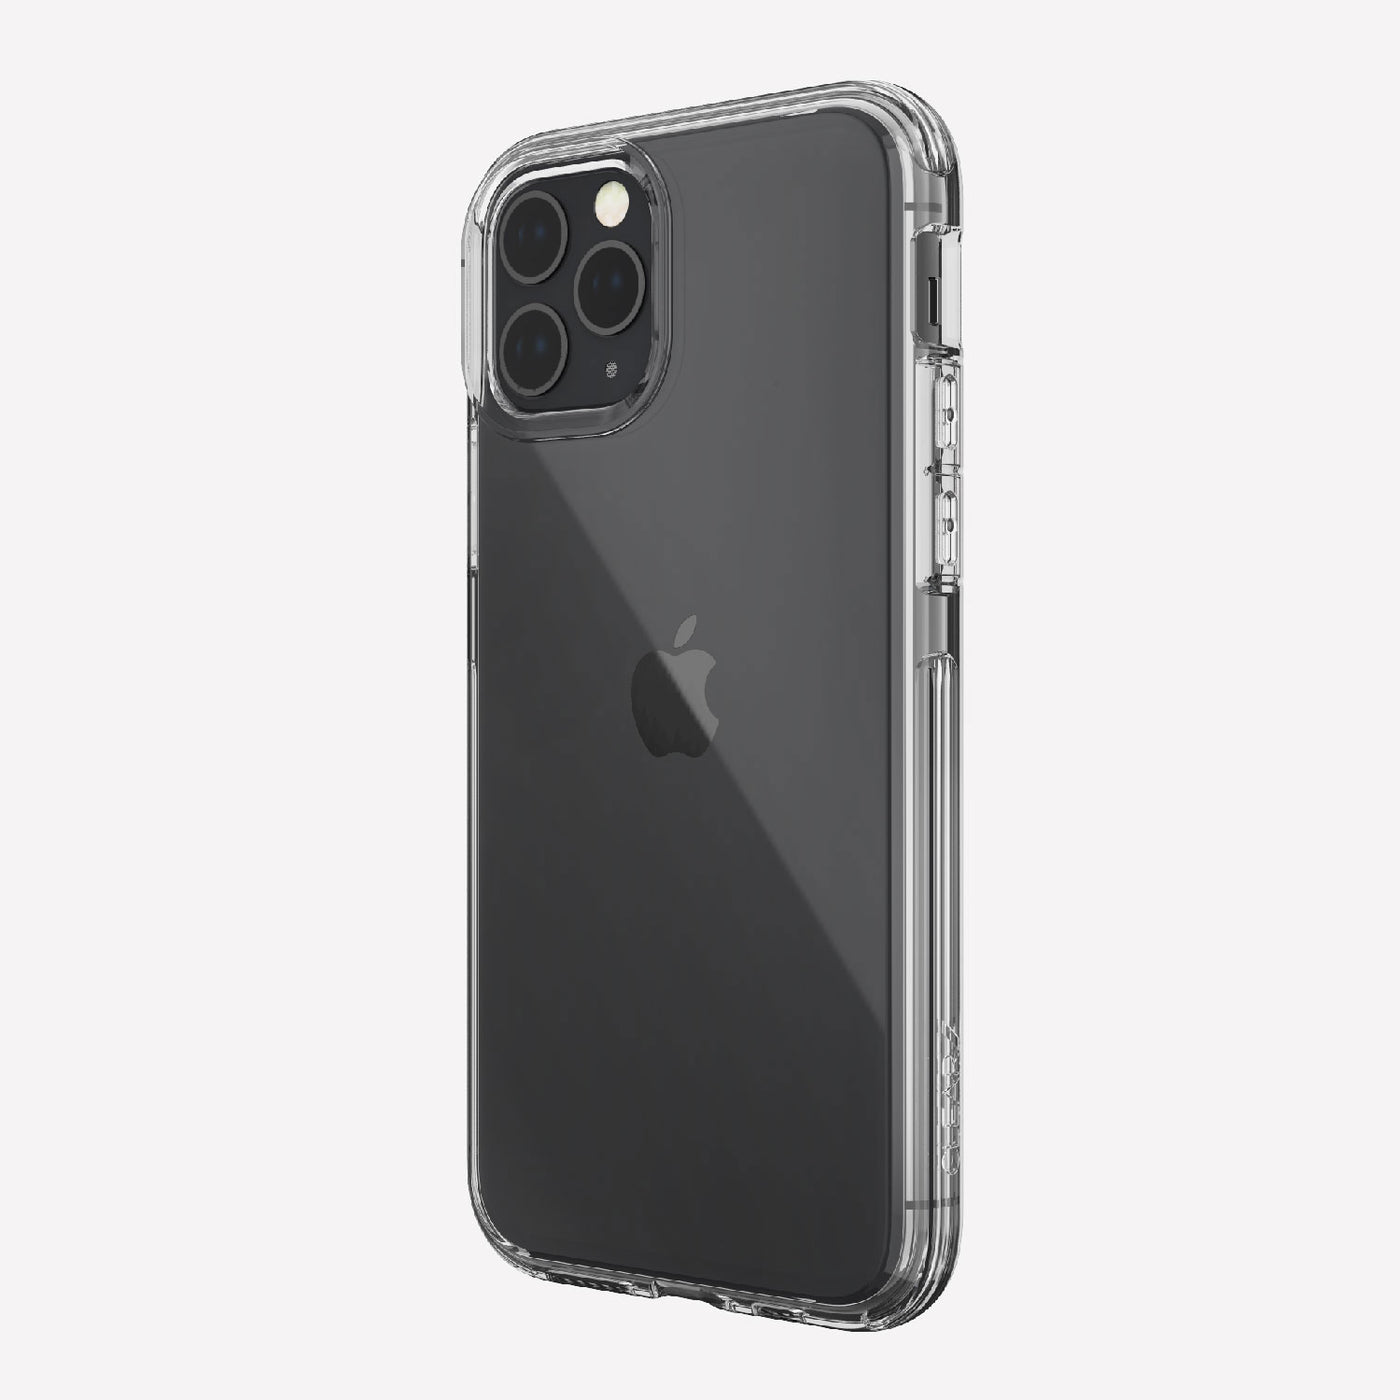 raptic clear in clear color on iphone 11 pro showing back of case and apple logo. #color_clear